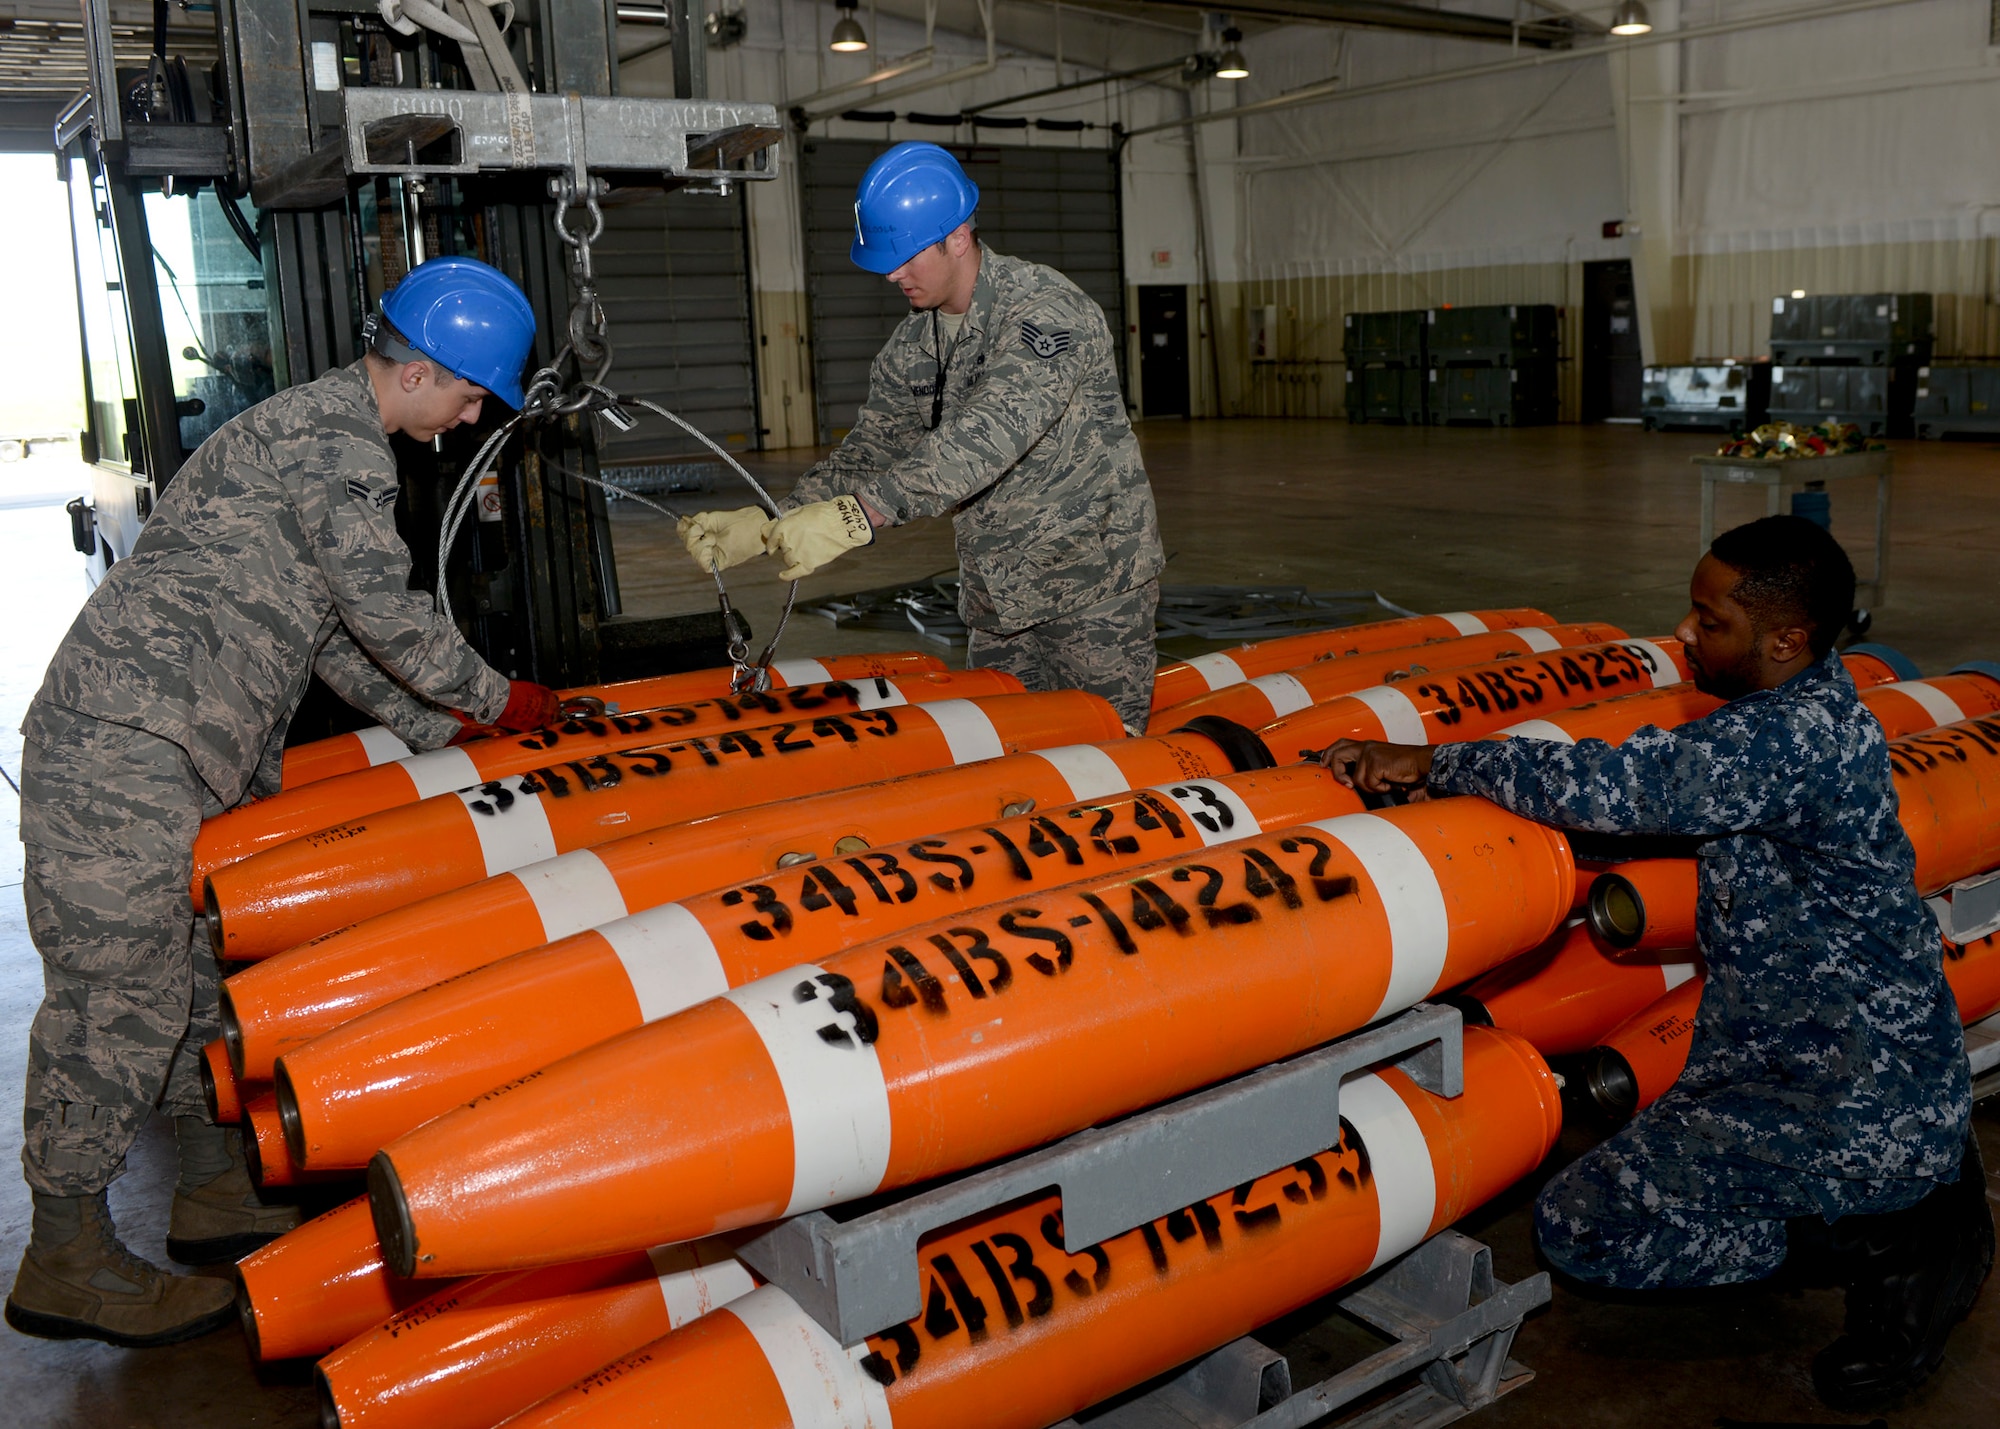 Staff Sgt. Raymond Elmendorf and Airman 1st Class Eric Morrison, 28th Munitions Squadron conventional maintenance crew members, assist Petty Officer 2nd Class Dwight Moore, Naval Munitions Command Seal Beach mineman, with loading Mk-62 Quickstrike mines onto munitions carts at Ellsworth Air Force Base, S.D., June 2, 2014. Moore, along with several other Navy minemen, spent a week with the 28th MUNS Airmen building and loading Navy mines into Ellsworth’s B-1B Lancer. The mines were then deployed at designated training areas along the Pacific coast, exercising mine field planning and the B-1B’s ability to deploy naval munitions. (U.S. Air Force photo by Senior Airman Anania Tekurio/Released)